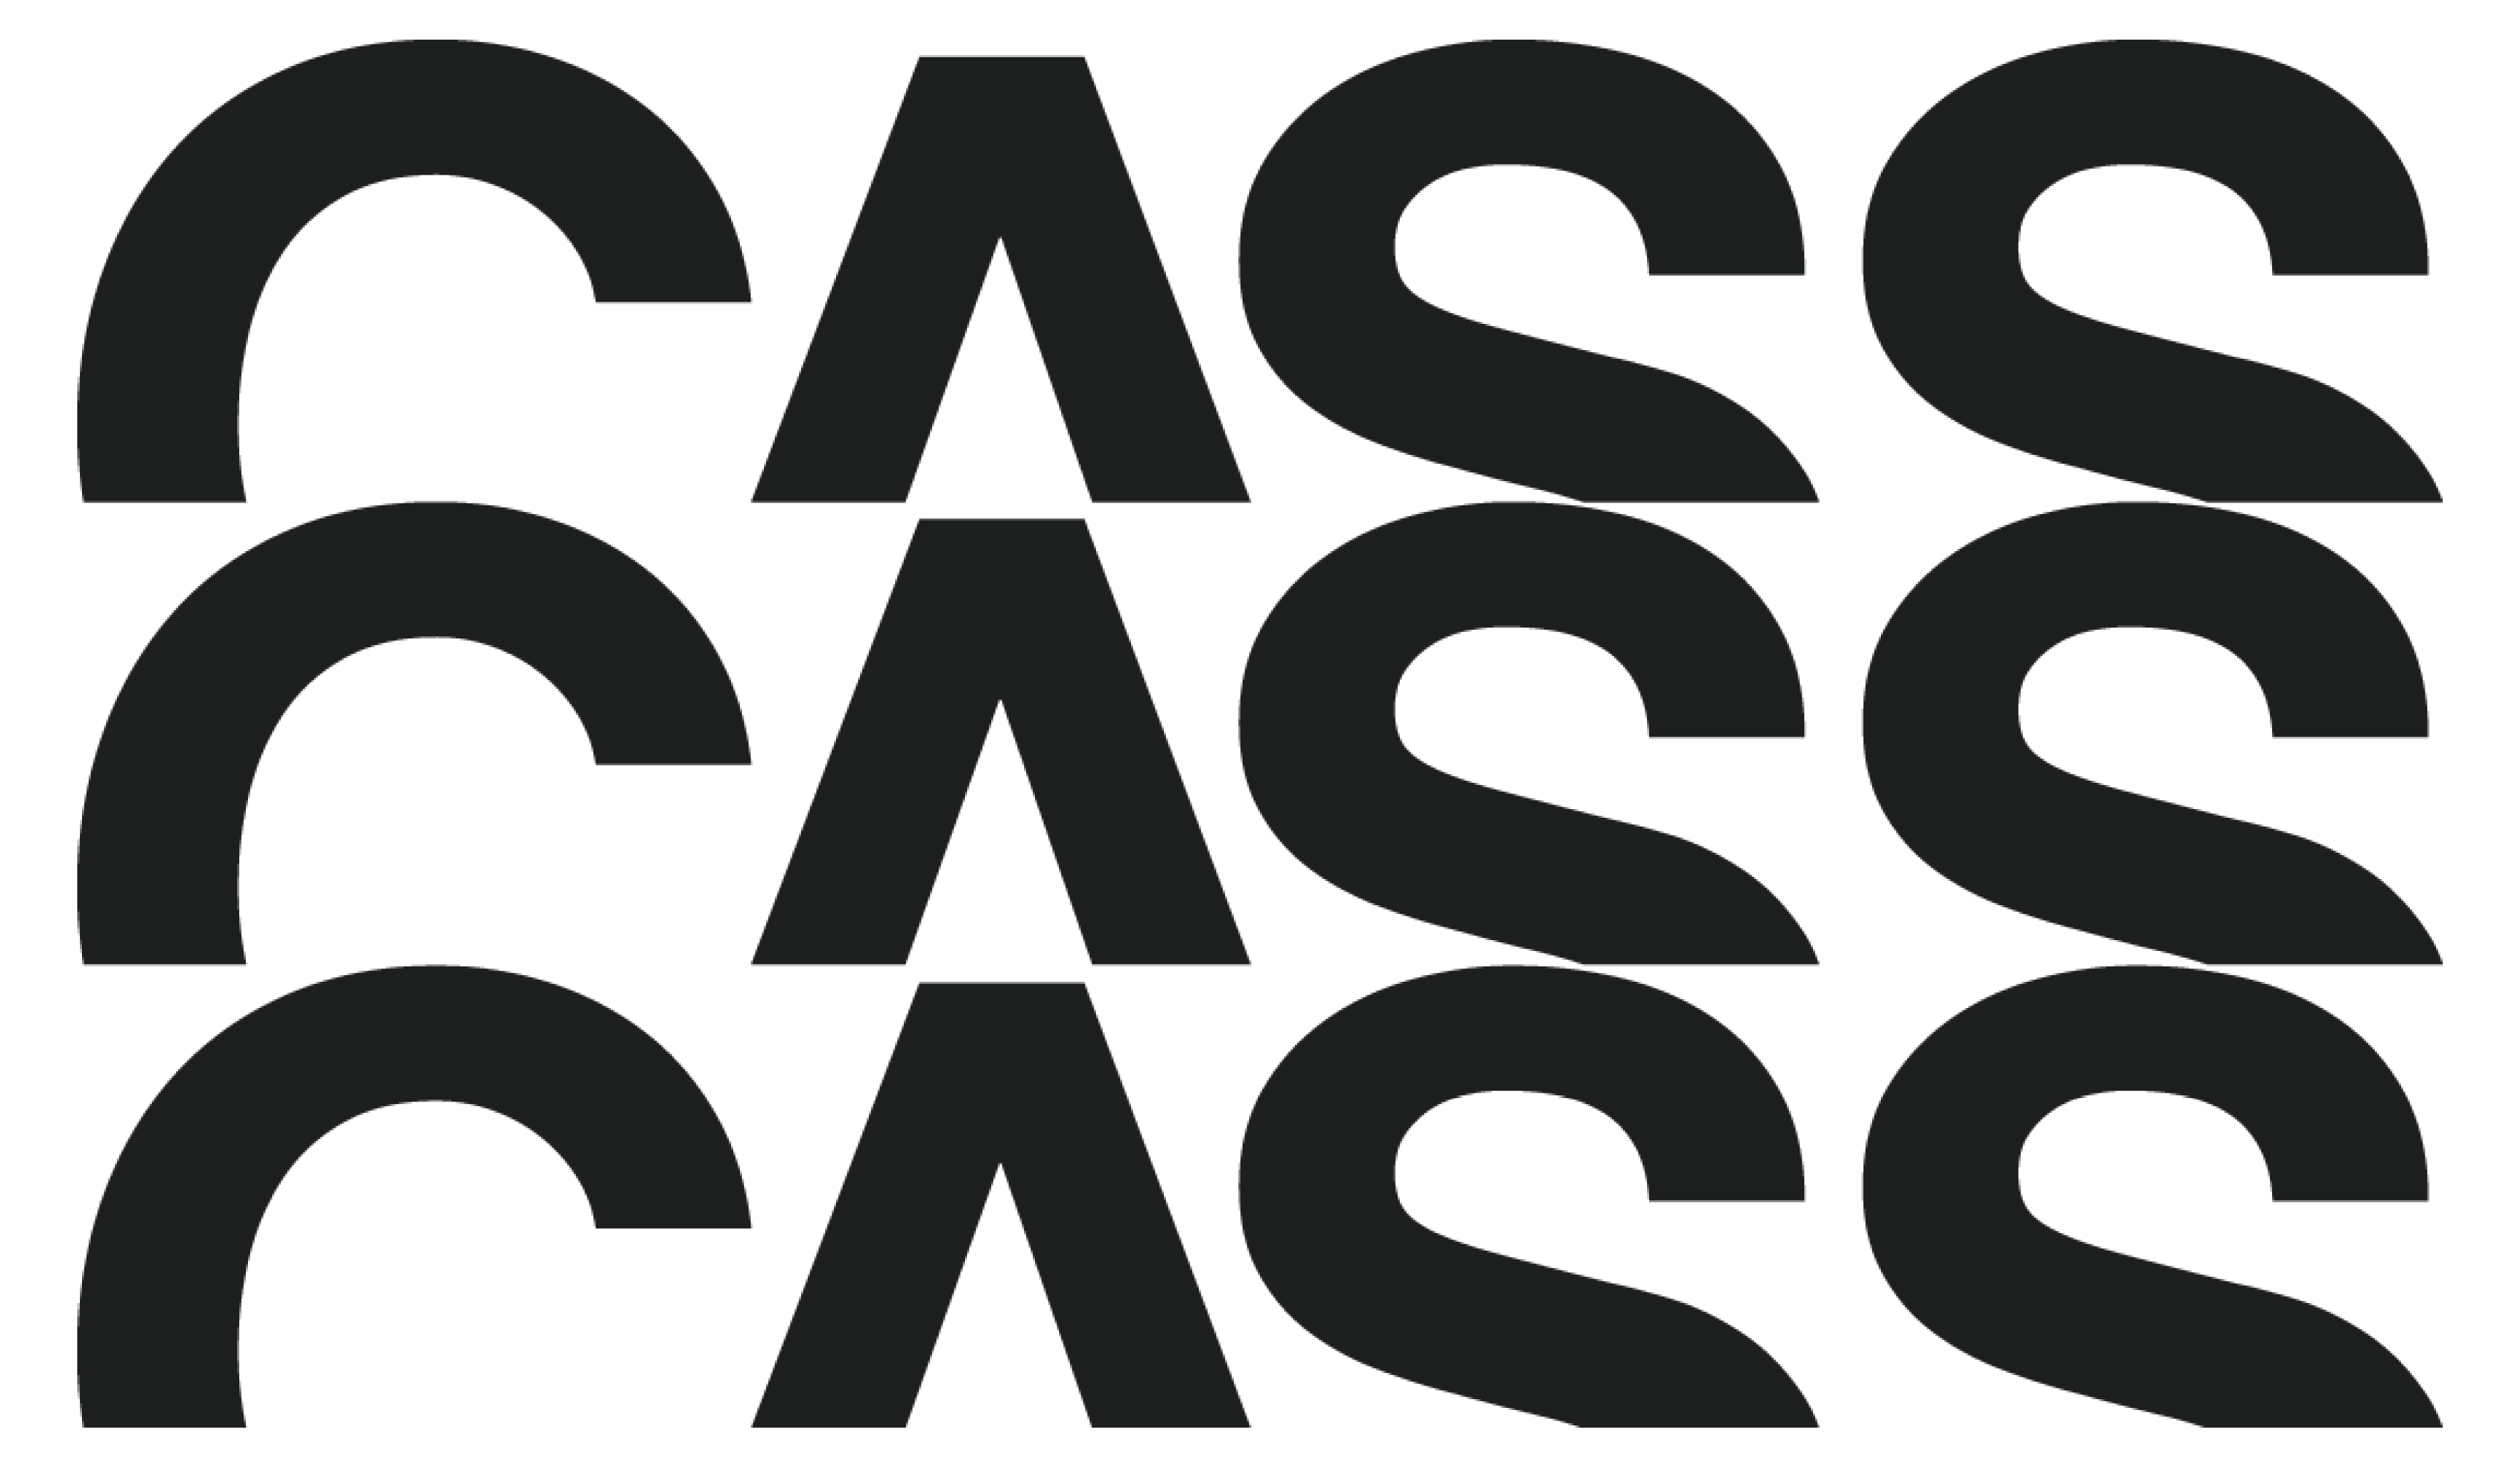 Old logo for the The Cass